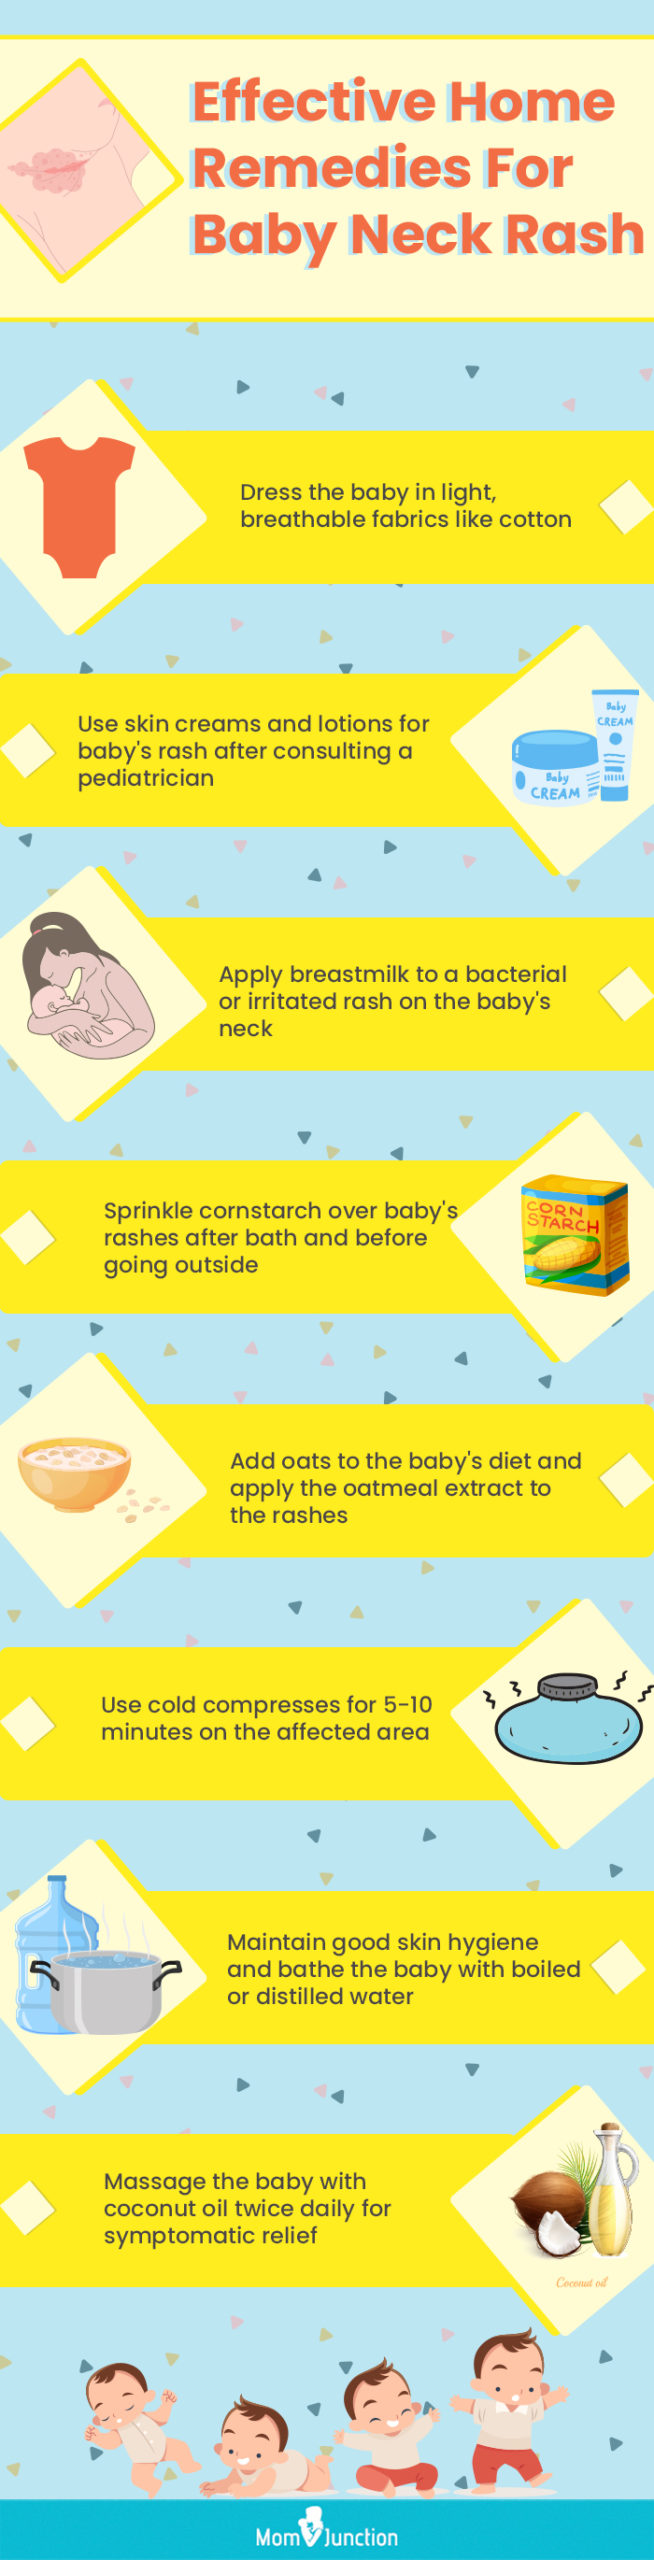 effective home remedies for baby neck rash (infographic)